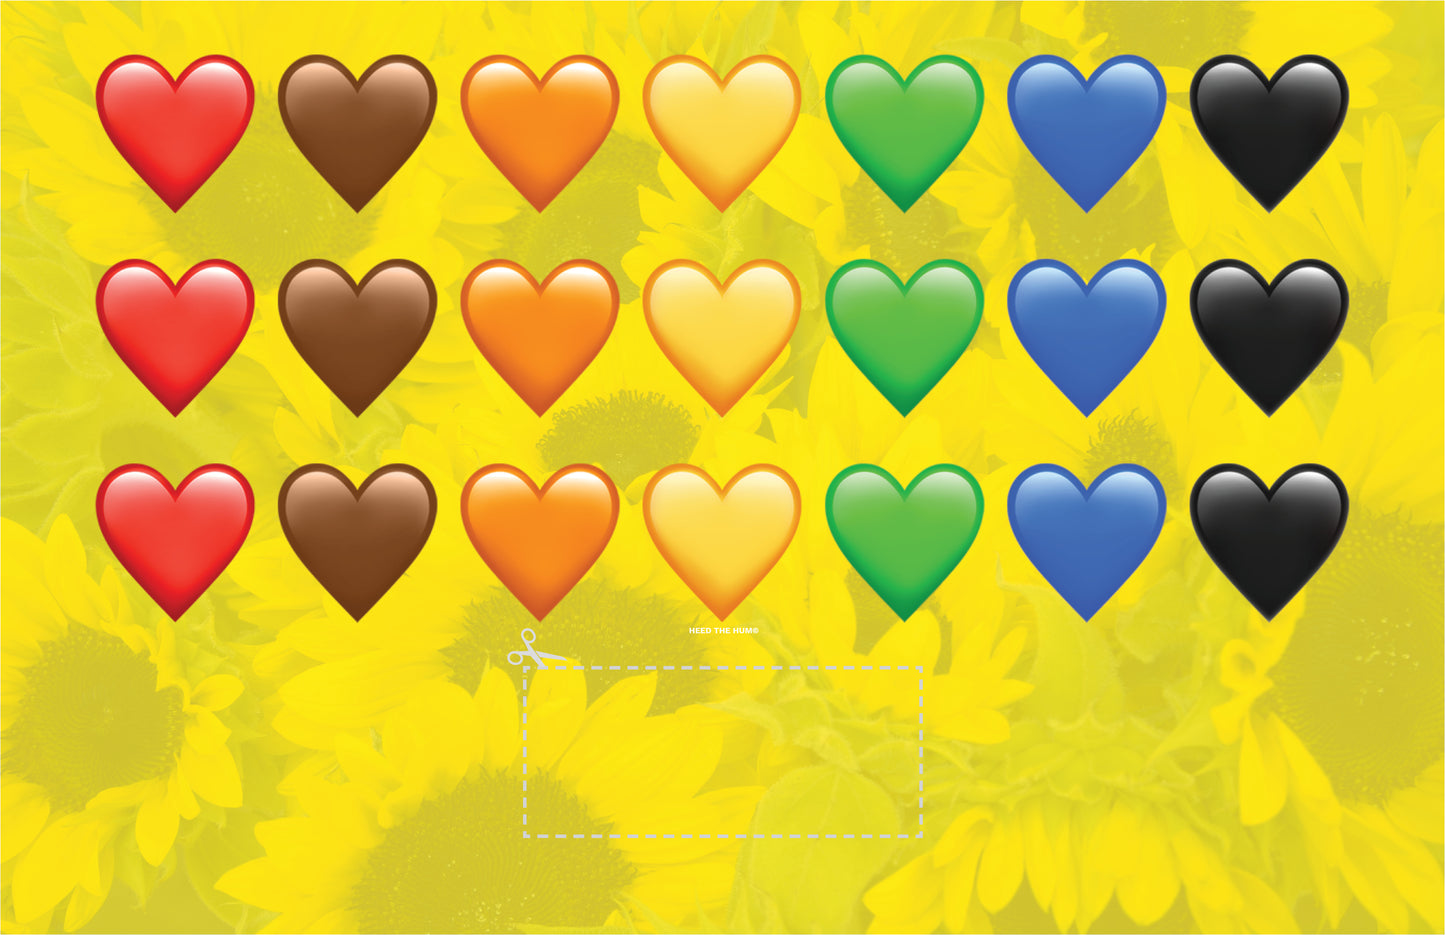 Rainbow Hearts on yellow sunflower protest sign